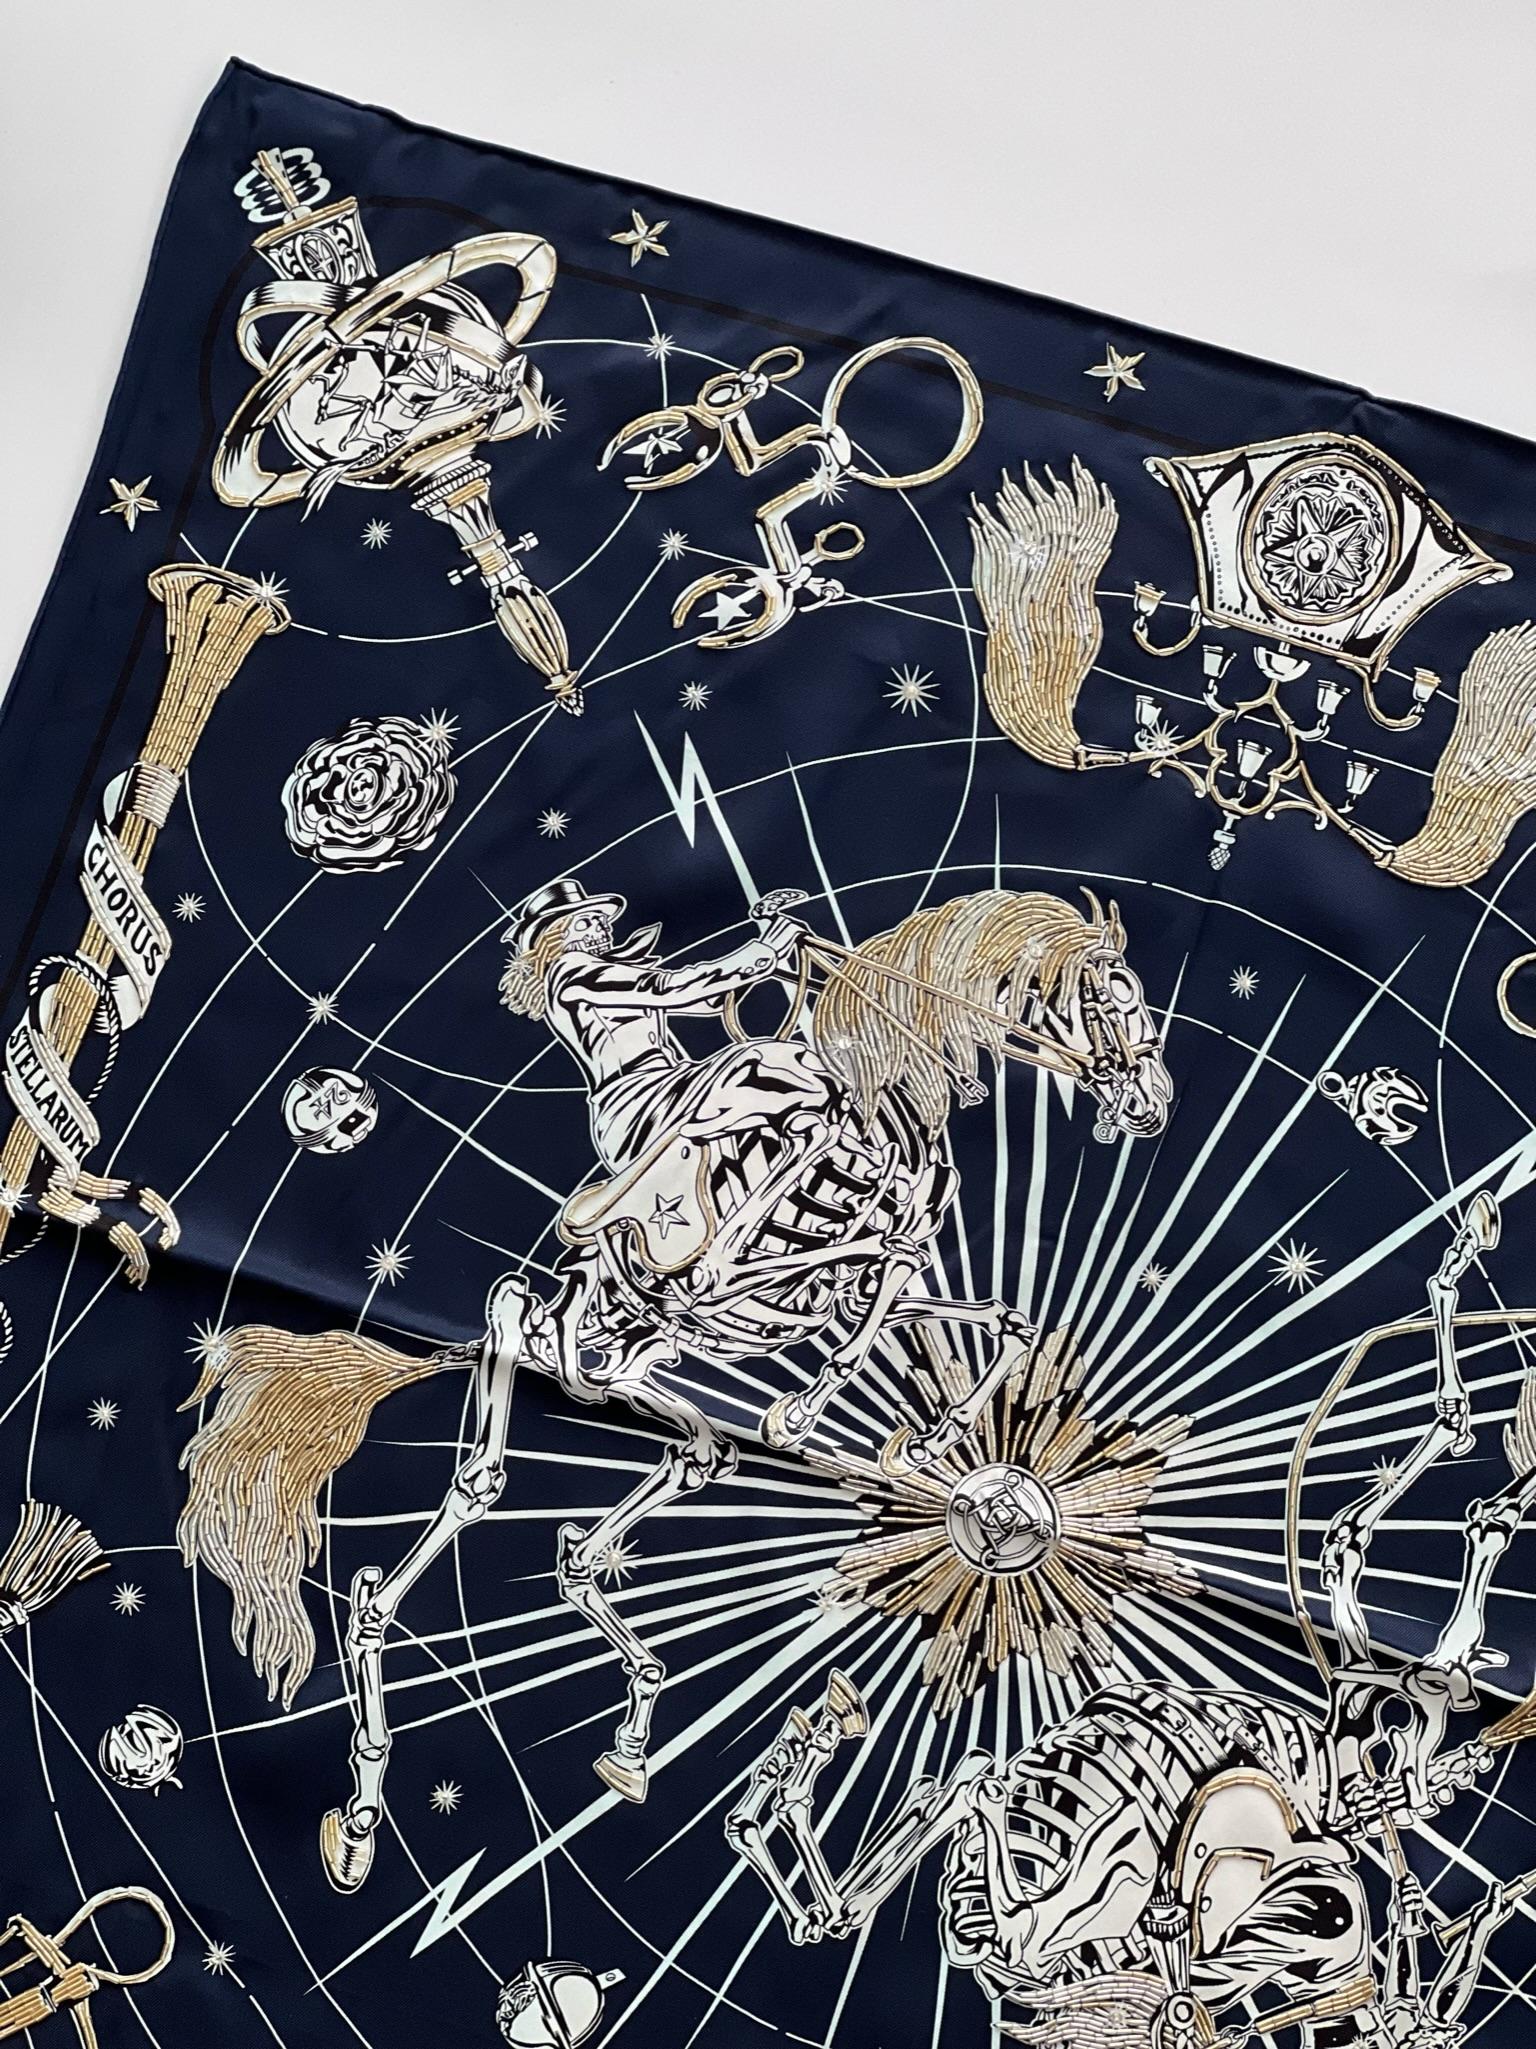 This limited scarf from Hermes is titled the Chorus Stellarum, a celebration of the equestrian universe. The stars surround embroidered equestrian accessories. The scarf is made from with silver detailing. The scarf takes over 35 hours of hand